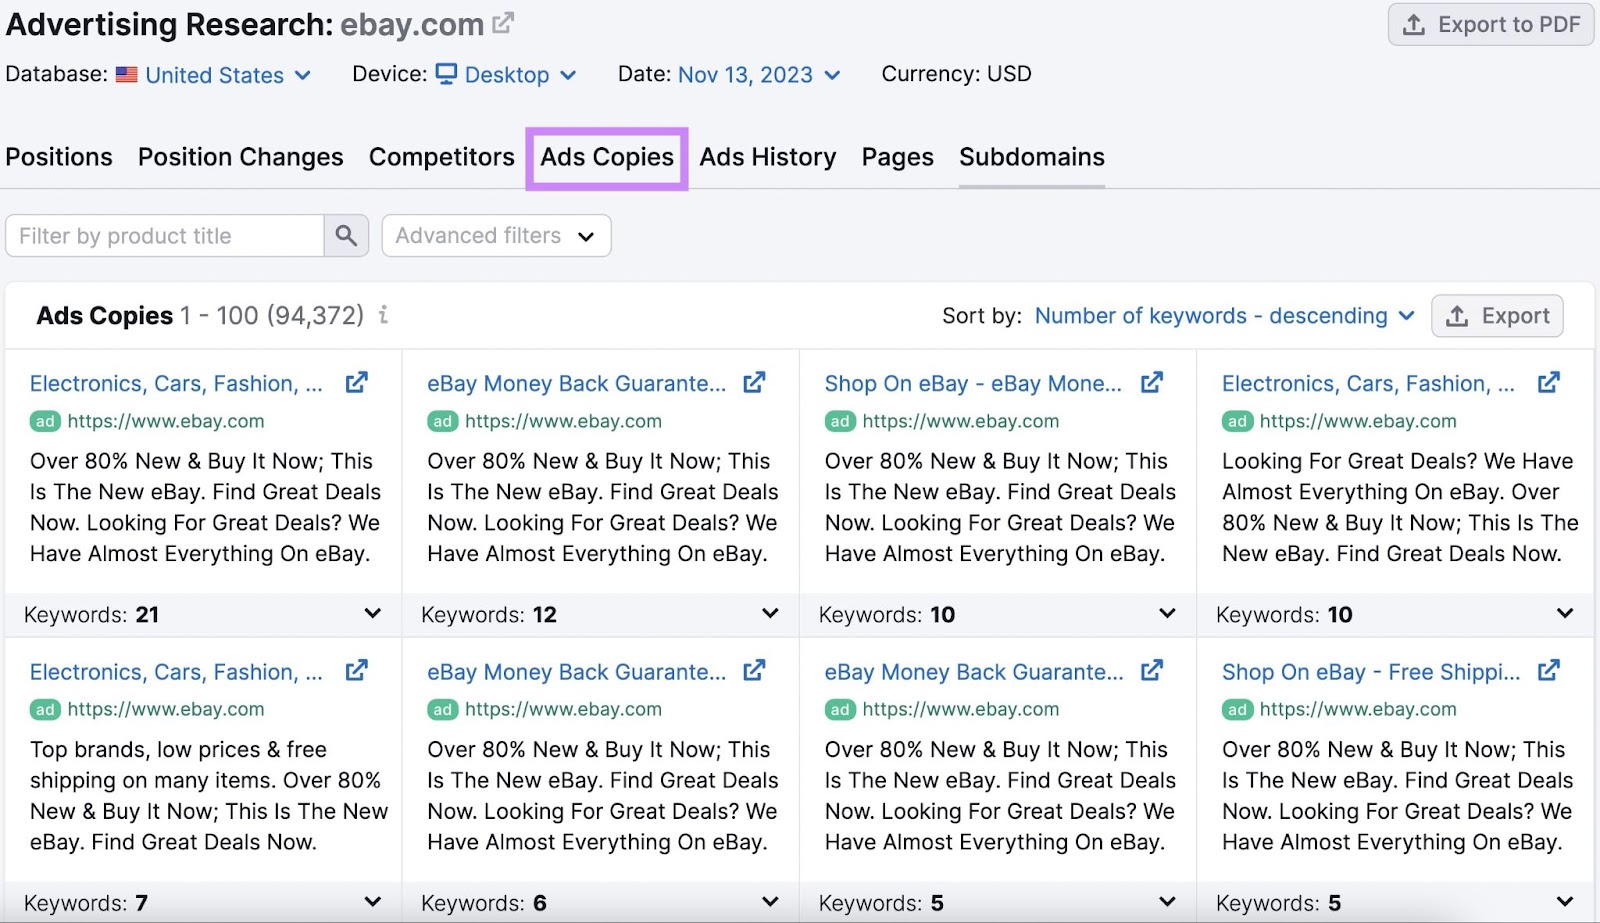 "Ads Copies" tab for "ebay.com" in Advertising Research tool